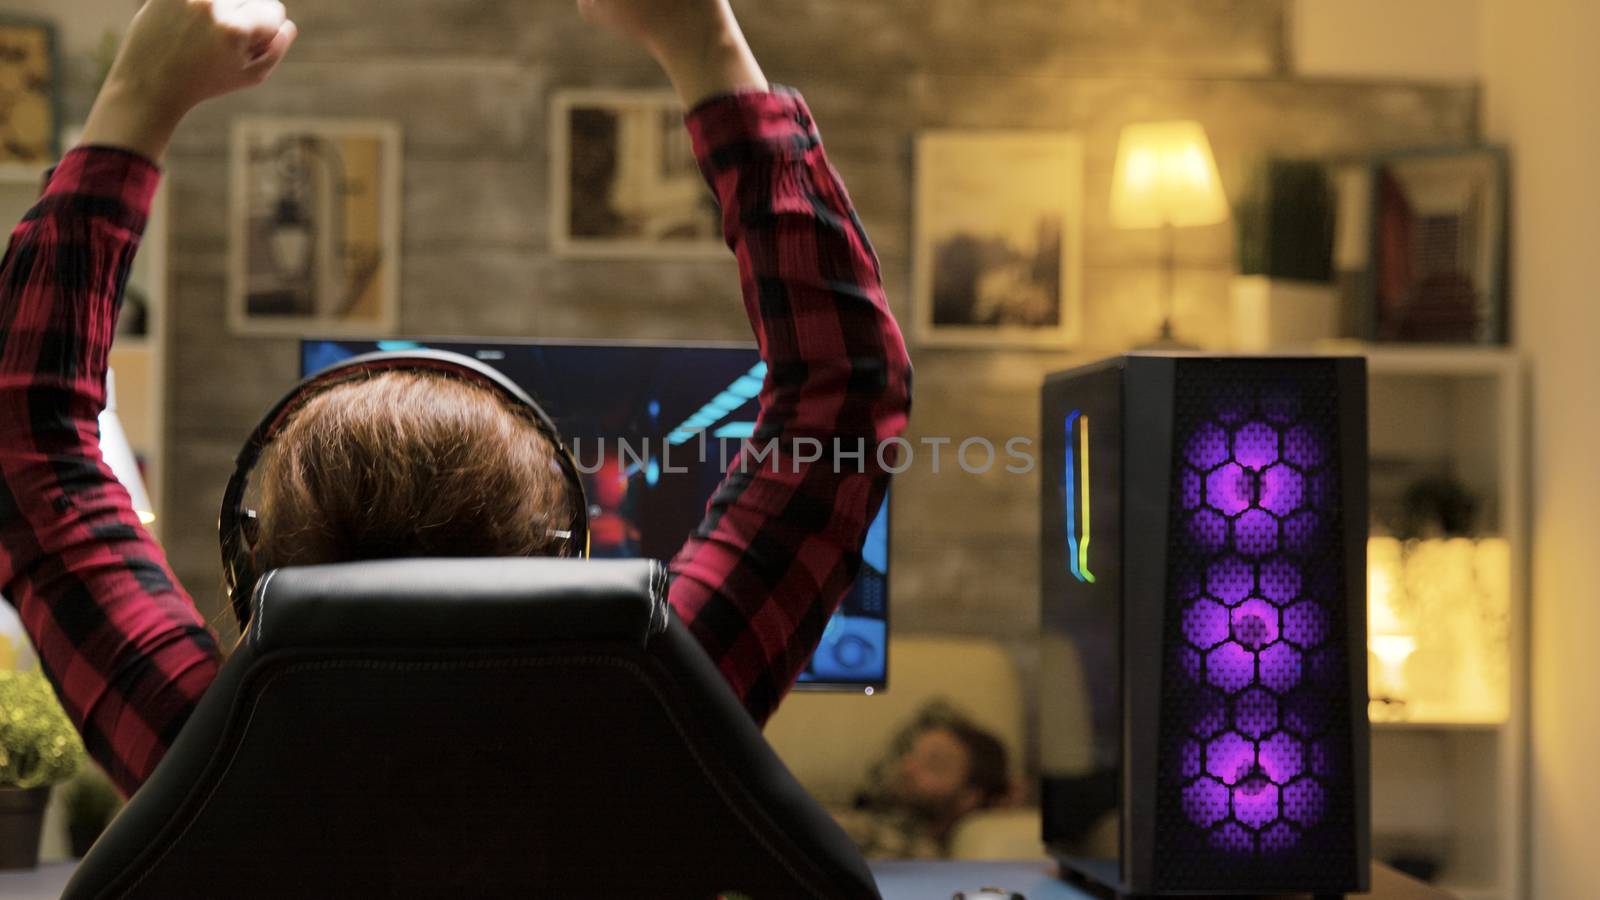 Back view of woman winning at video games while playing late at night. She has a powerful PC with neon fans in the front